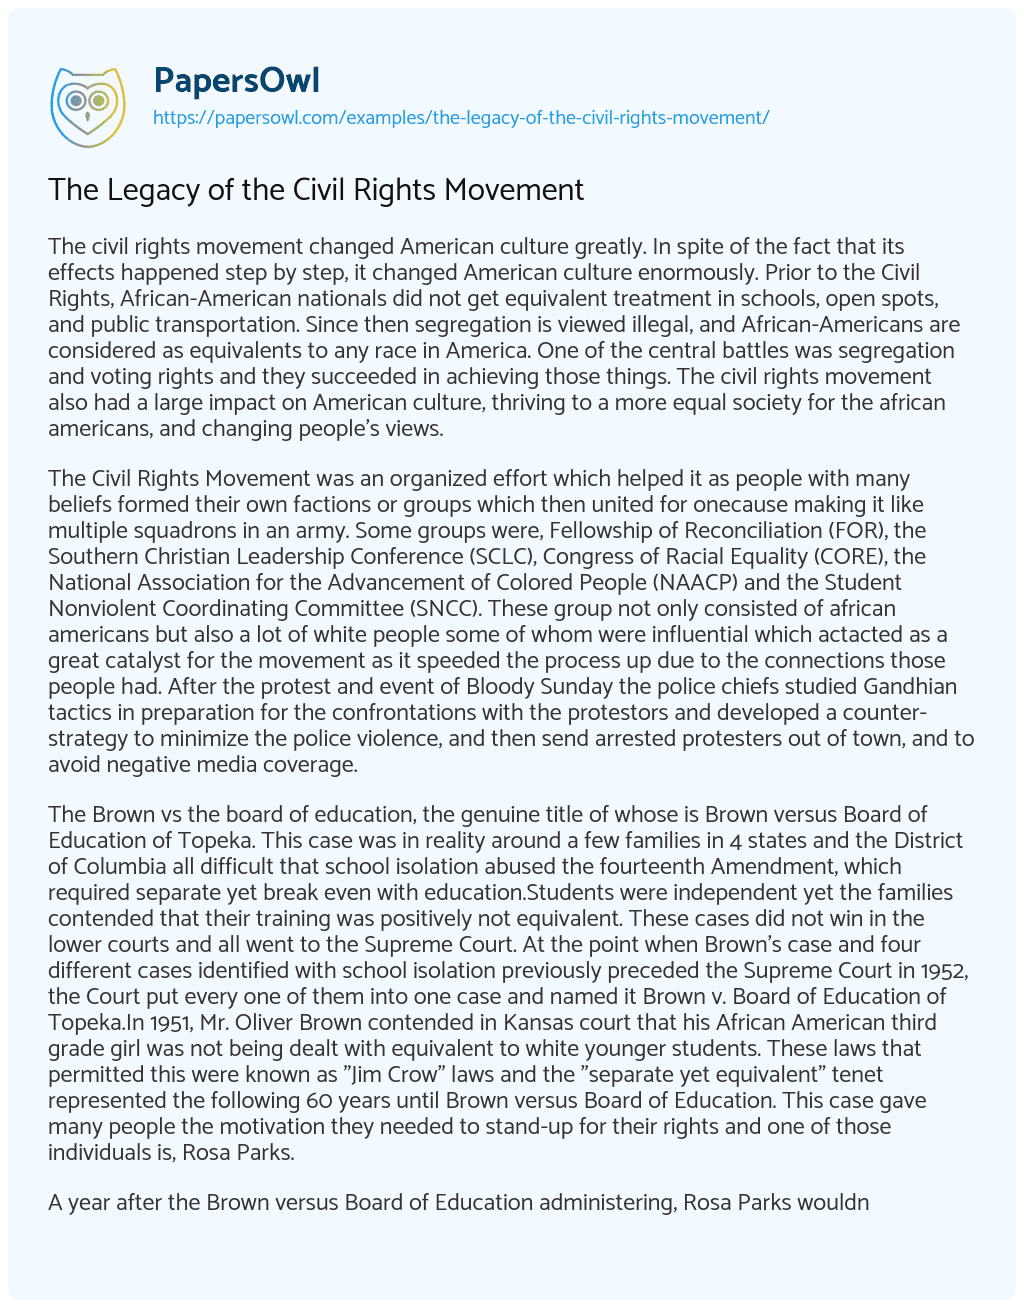 Essay on The Legacy of the Civil Rights Movement